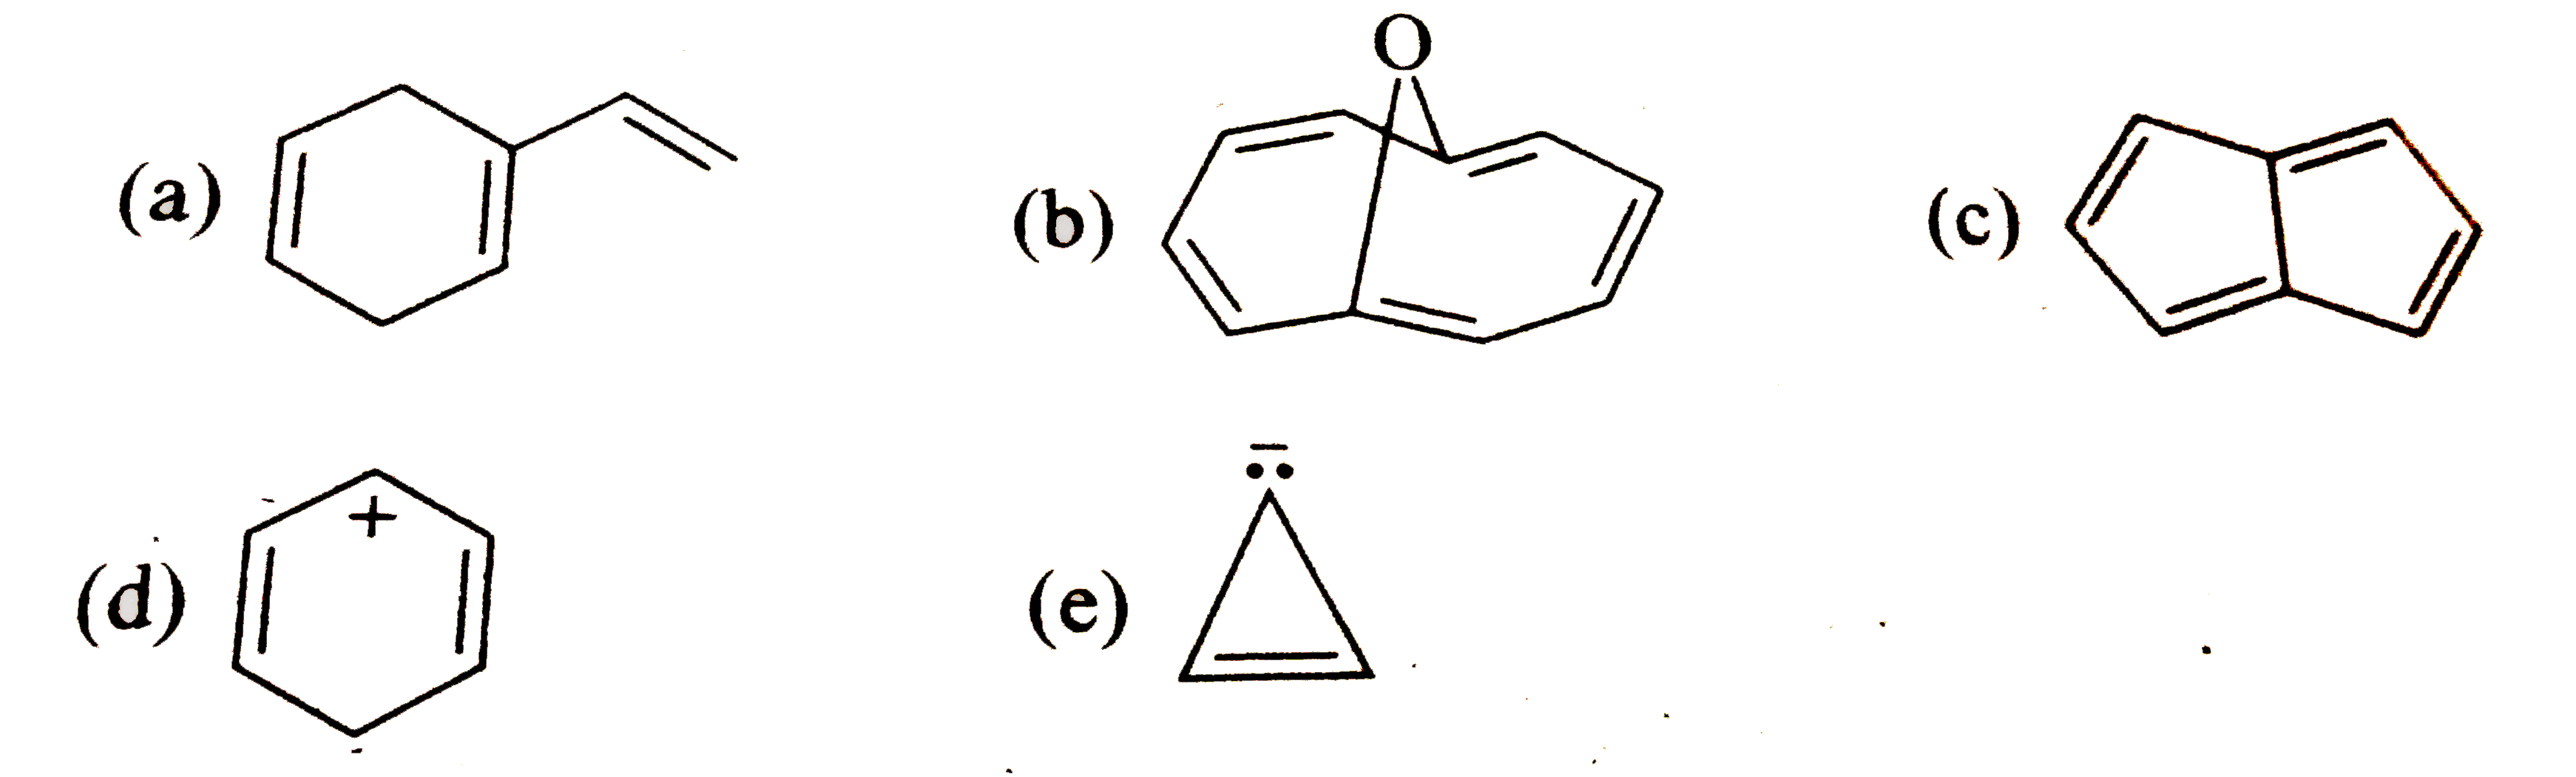 Lebel each compound as aromatic, antiaromatic, or not aromatic. Assume all completely conjugated rings are planar.